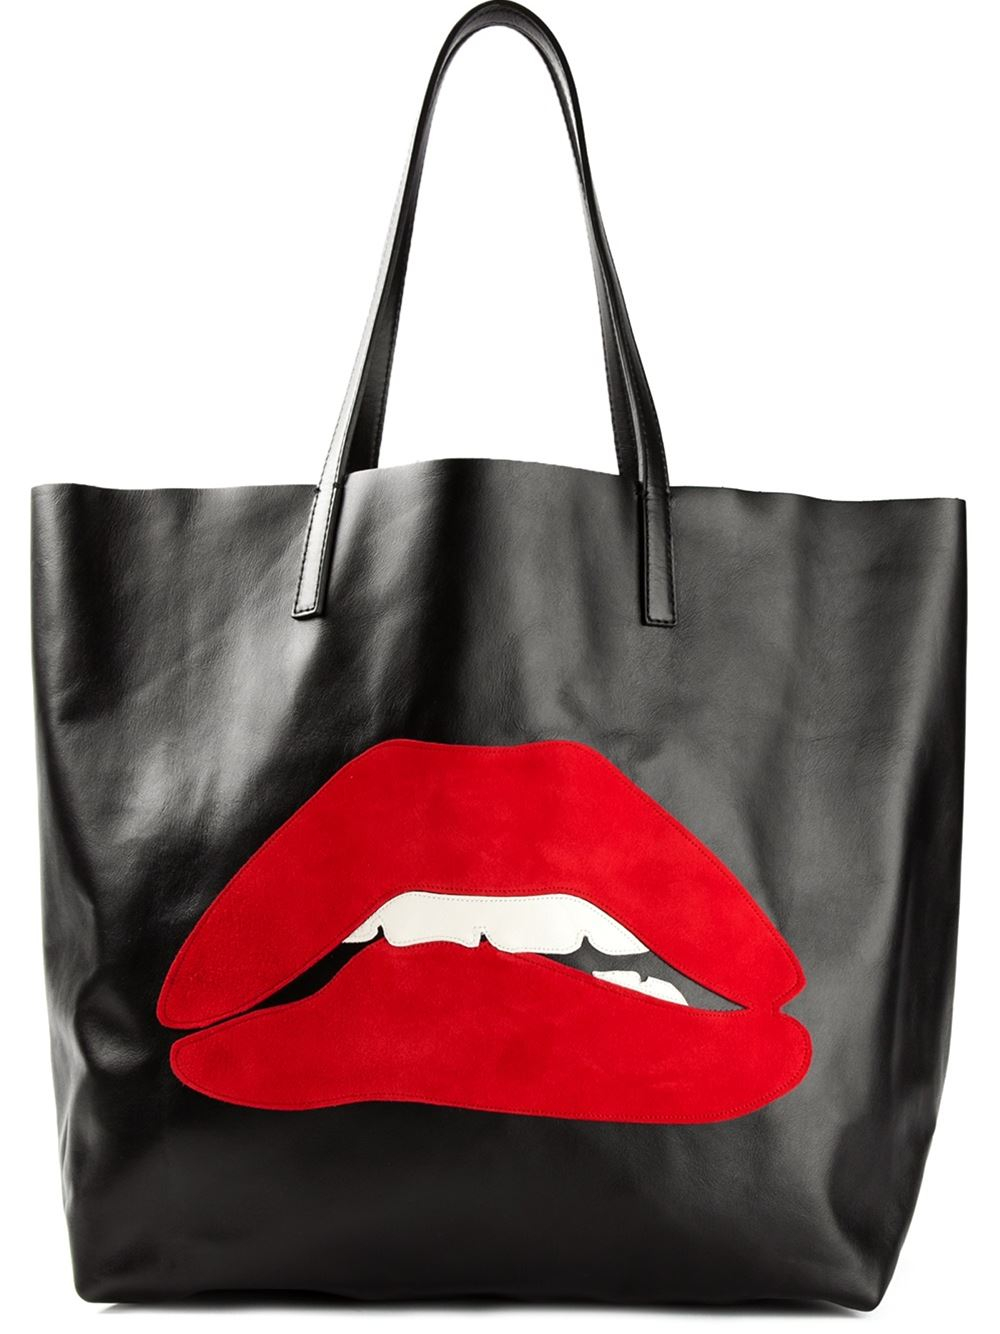 RED Valentino Lips Tote in Black - Lyst